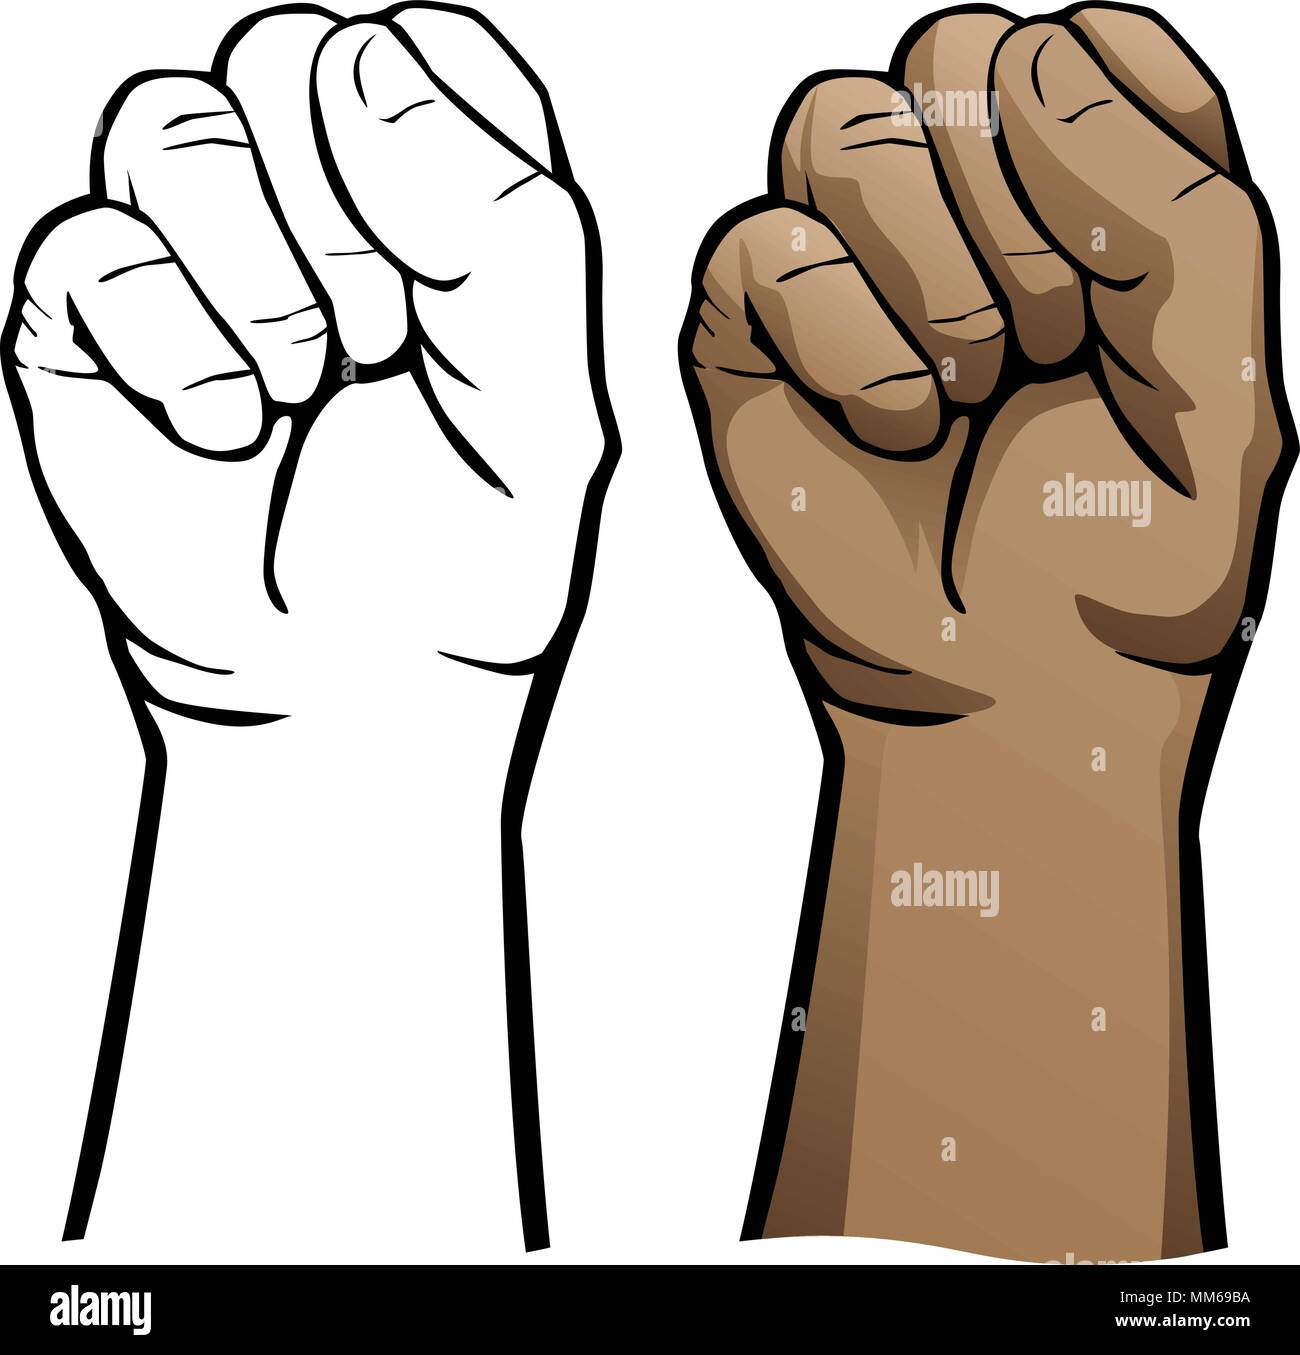 Hand Fist Vector Illustration Stock Vector Image And Art Alamy